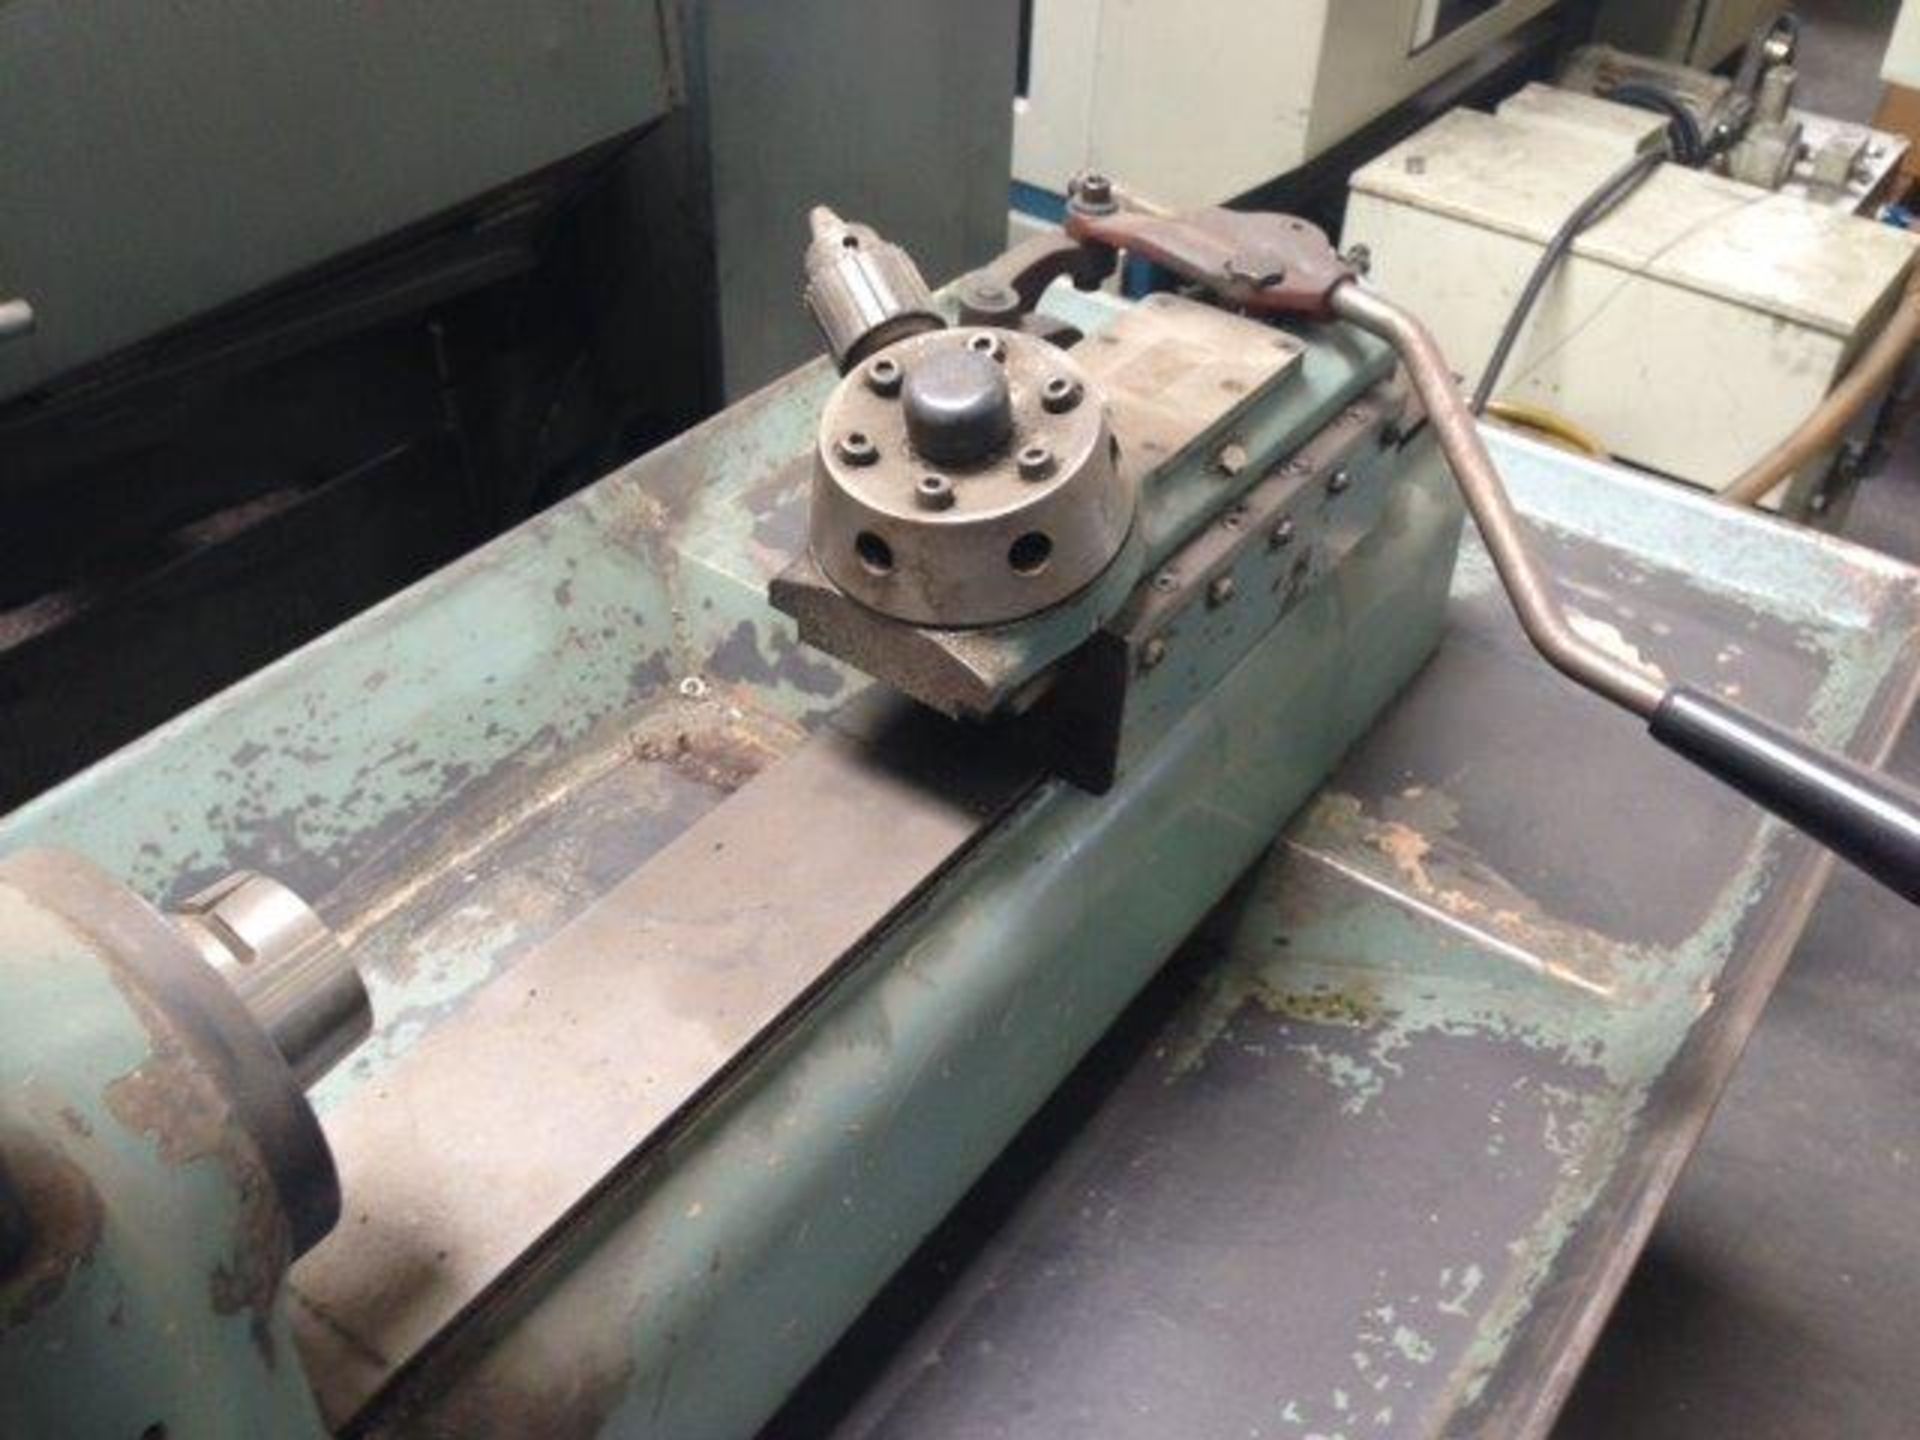 Feeler FTS-27 Narrow Bed Second OP Lathe w/ 230-3500 RPM, 6-Station Turret Assembly, SOLD AS IS - Image 4 of 4